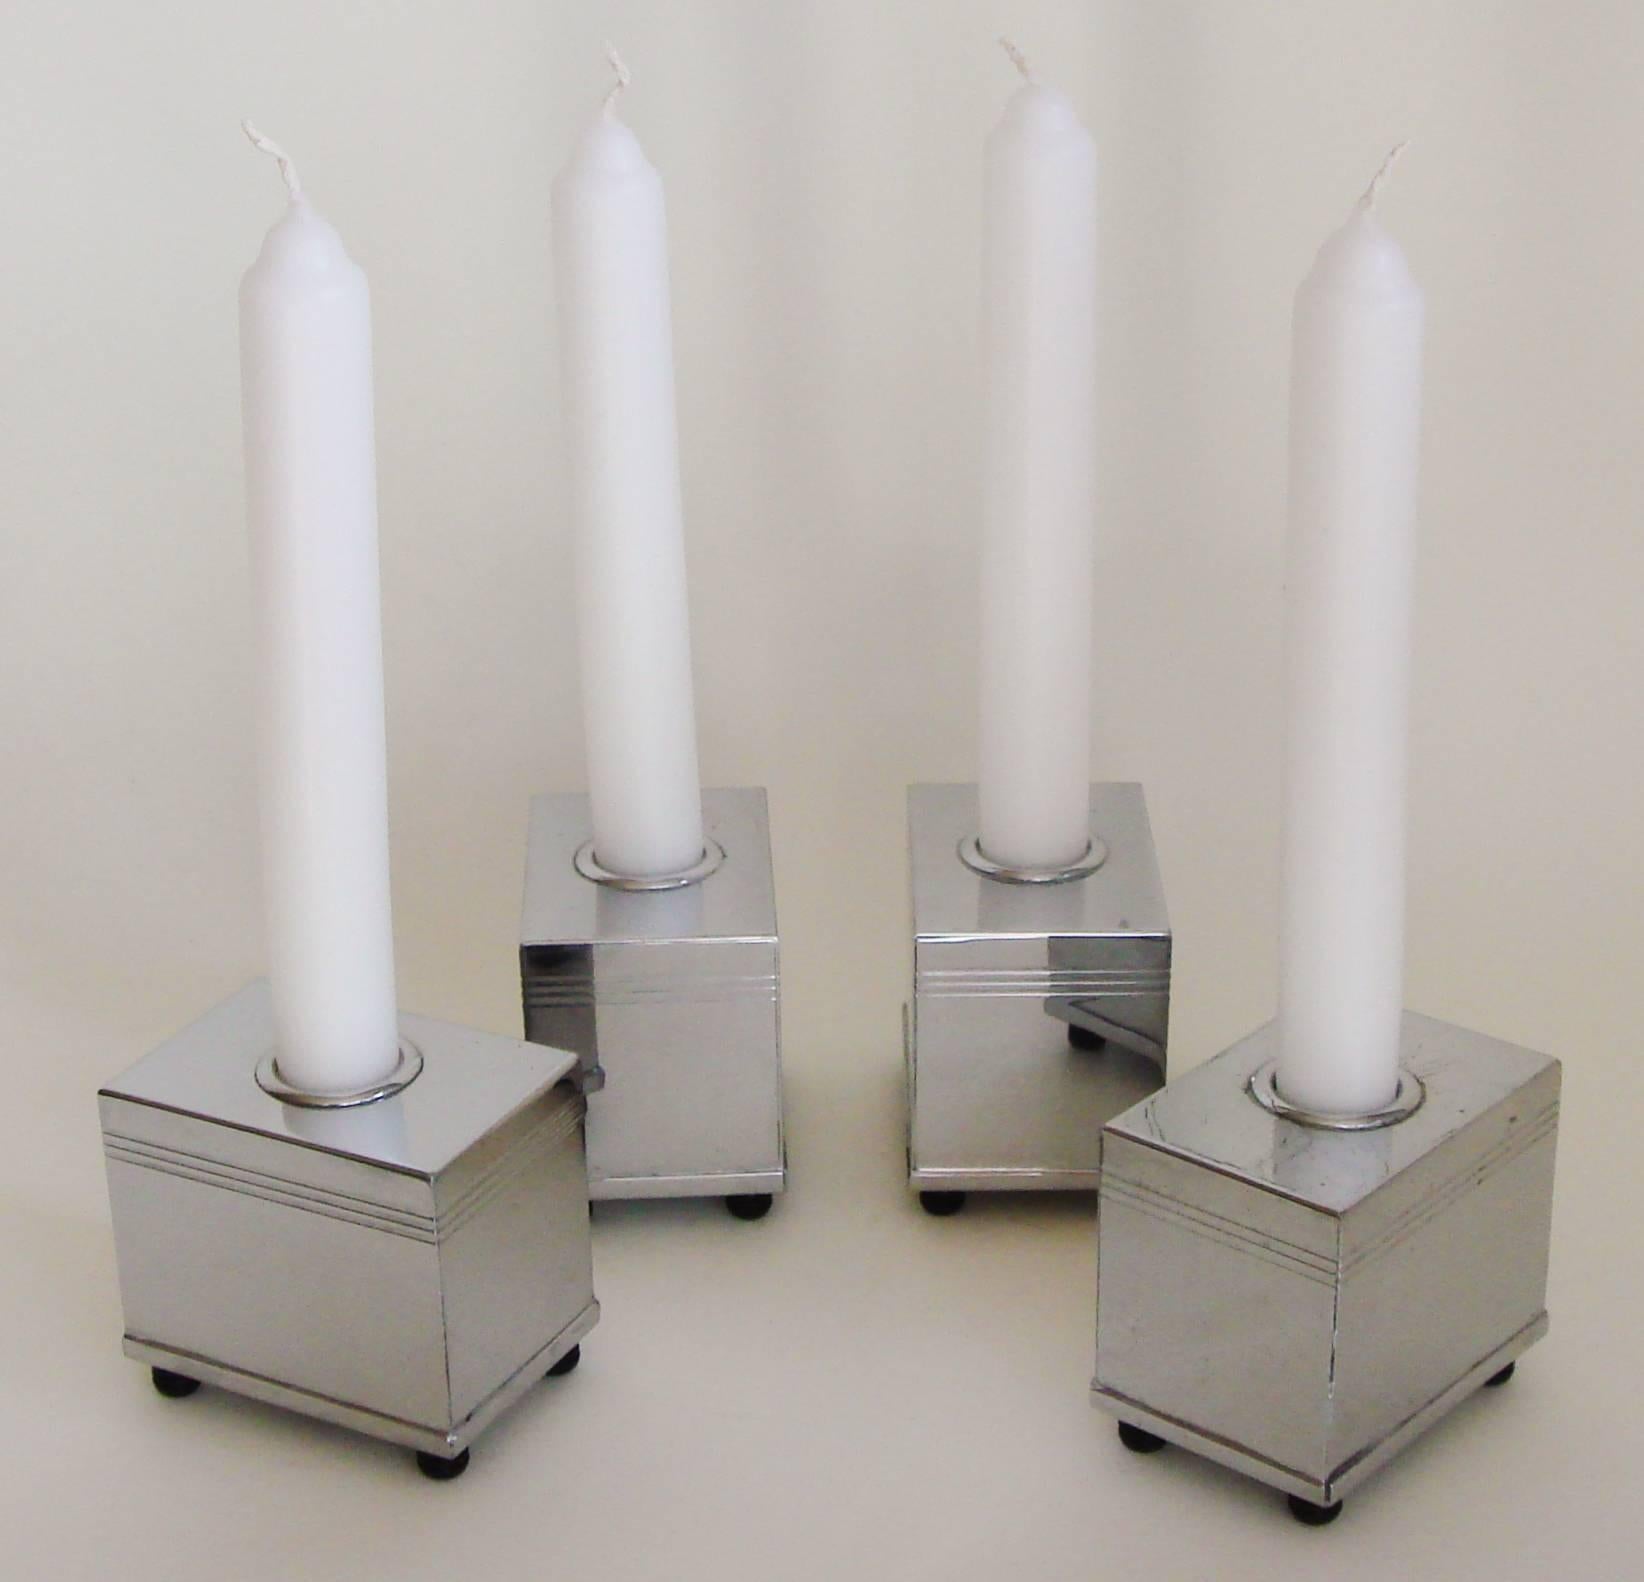 Painted Four Rare American Art Deco Chrome Chase Architex Candlesticks by Lurelle Guild For Sale